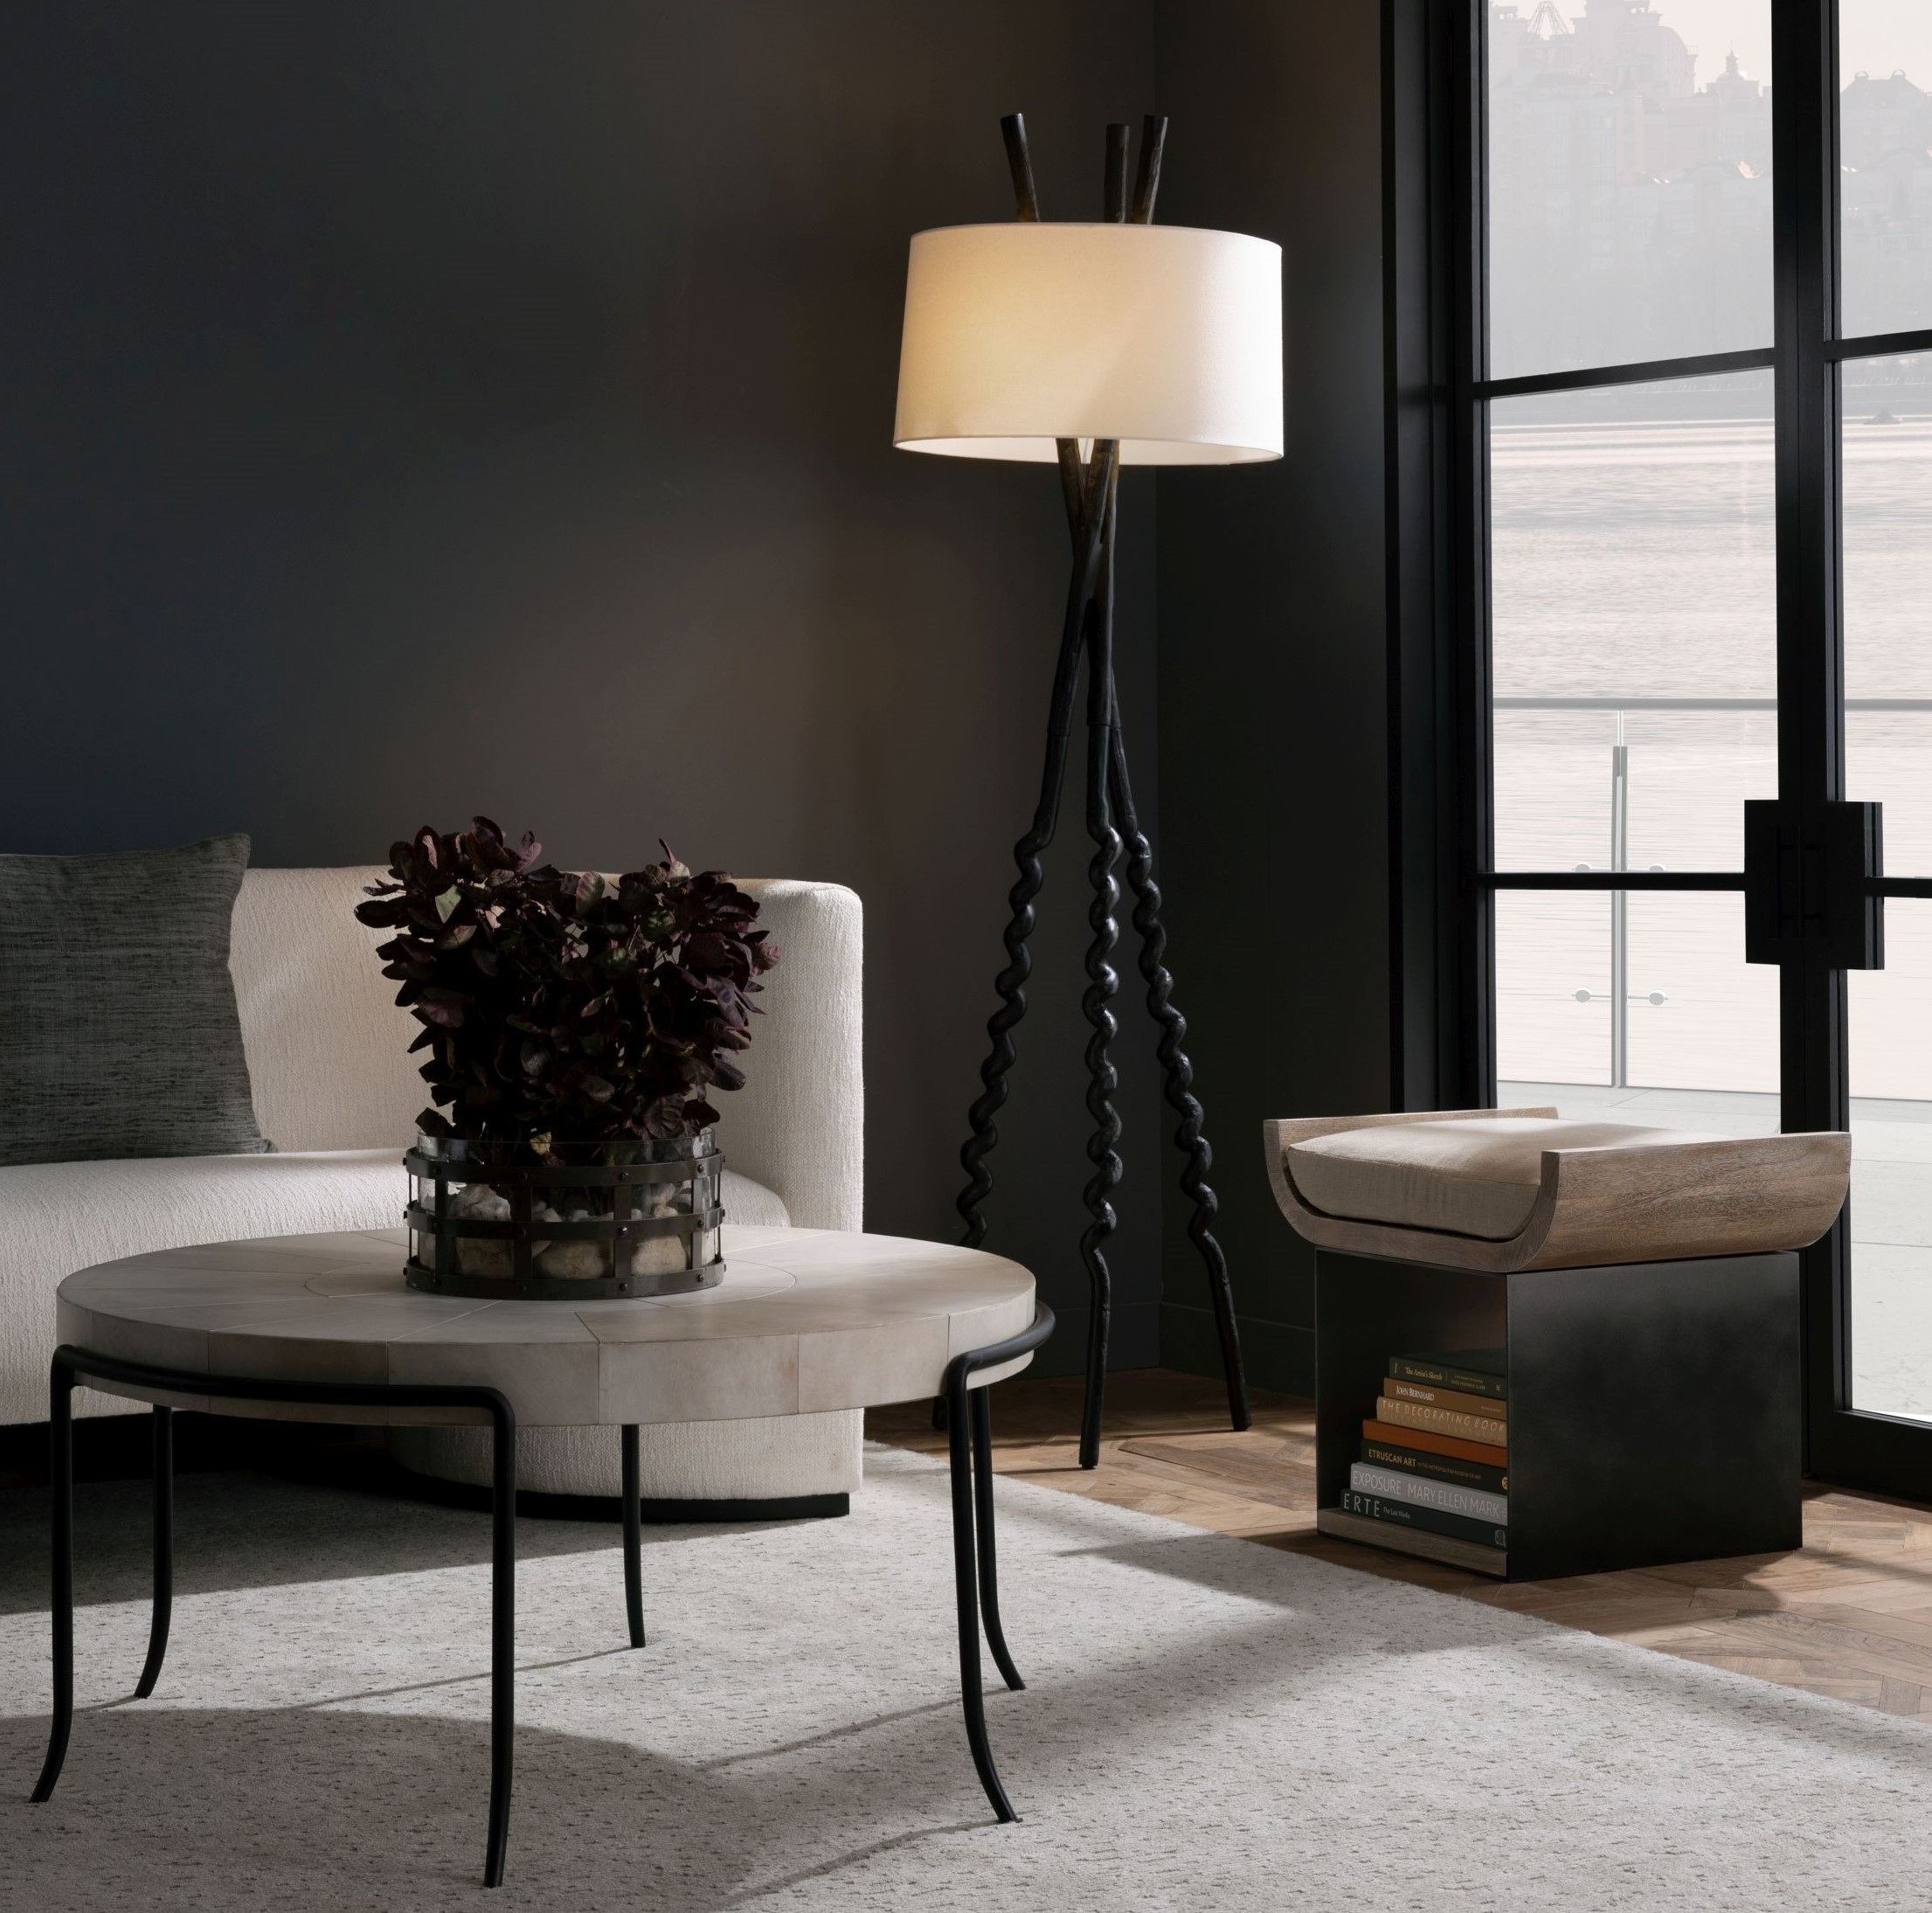 Arteriors, Olympus Settee in Cloud £9,747 and Mosquito Coffee table £6,060 - cropped by BM